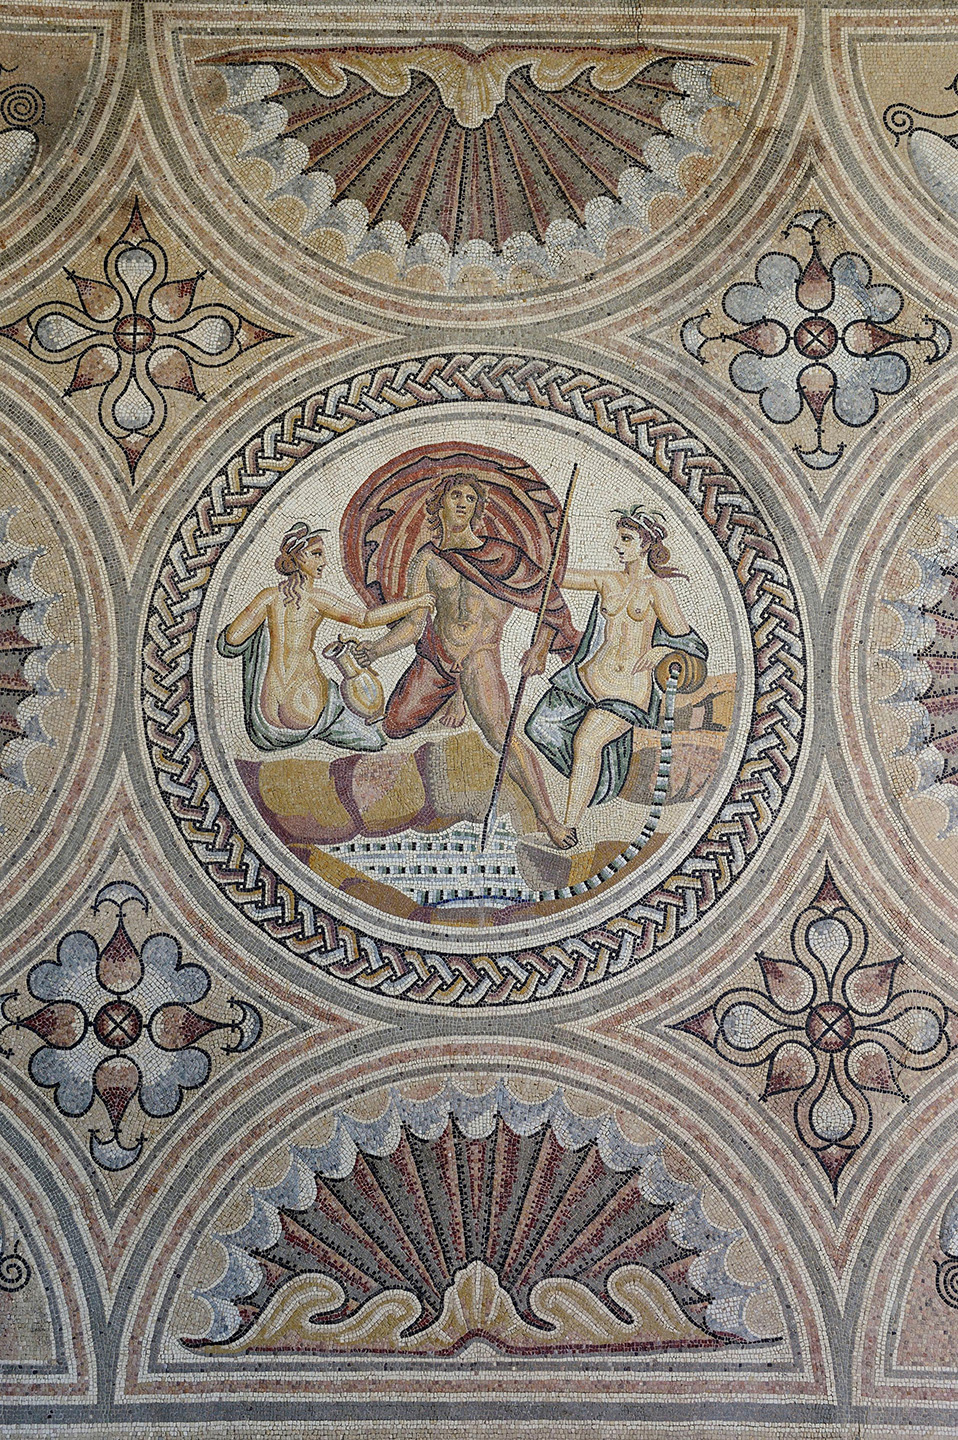 Figure 11. Mosaic Floor with Hylas and the Nymphs